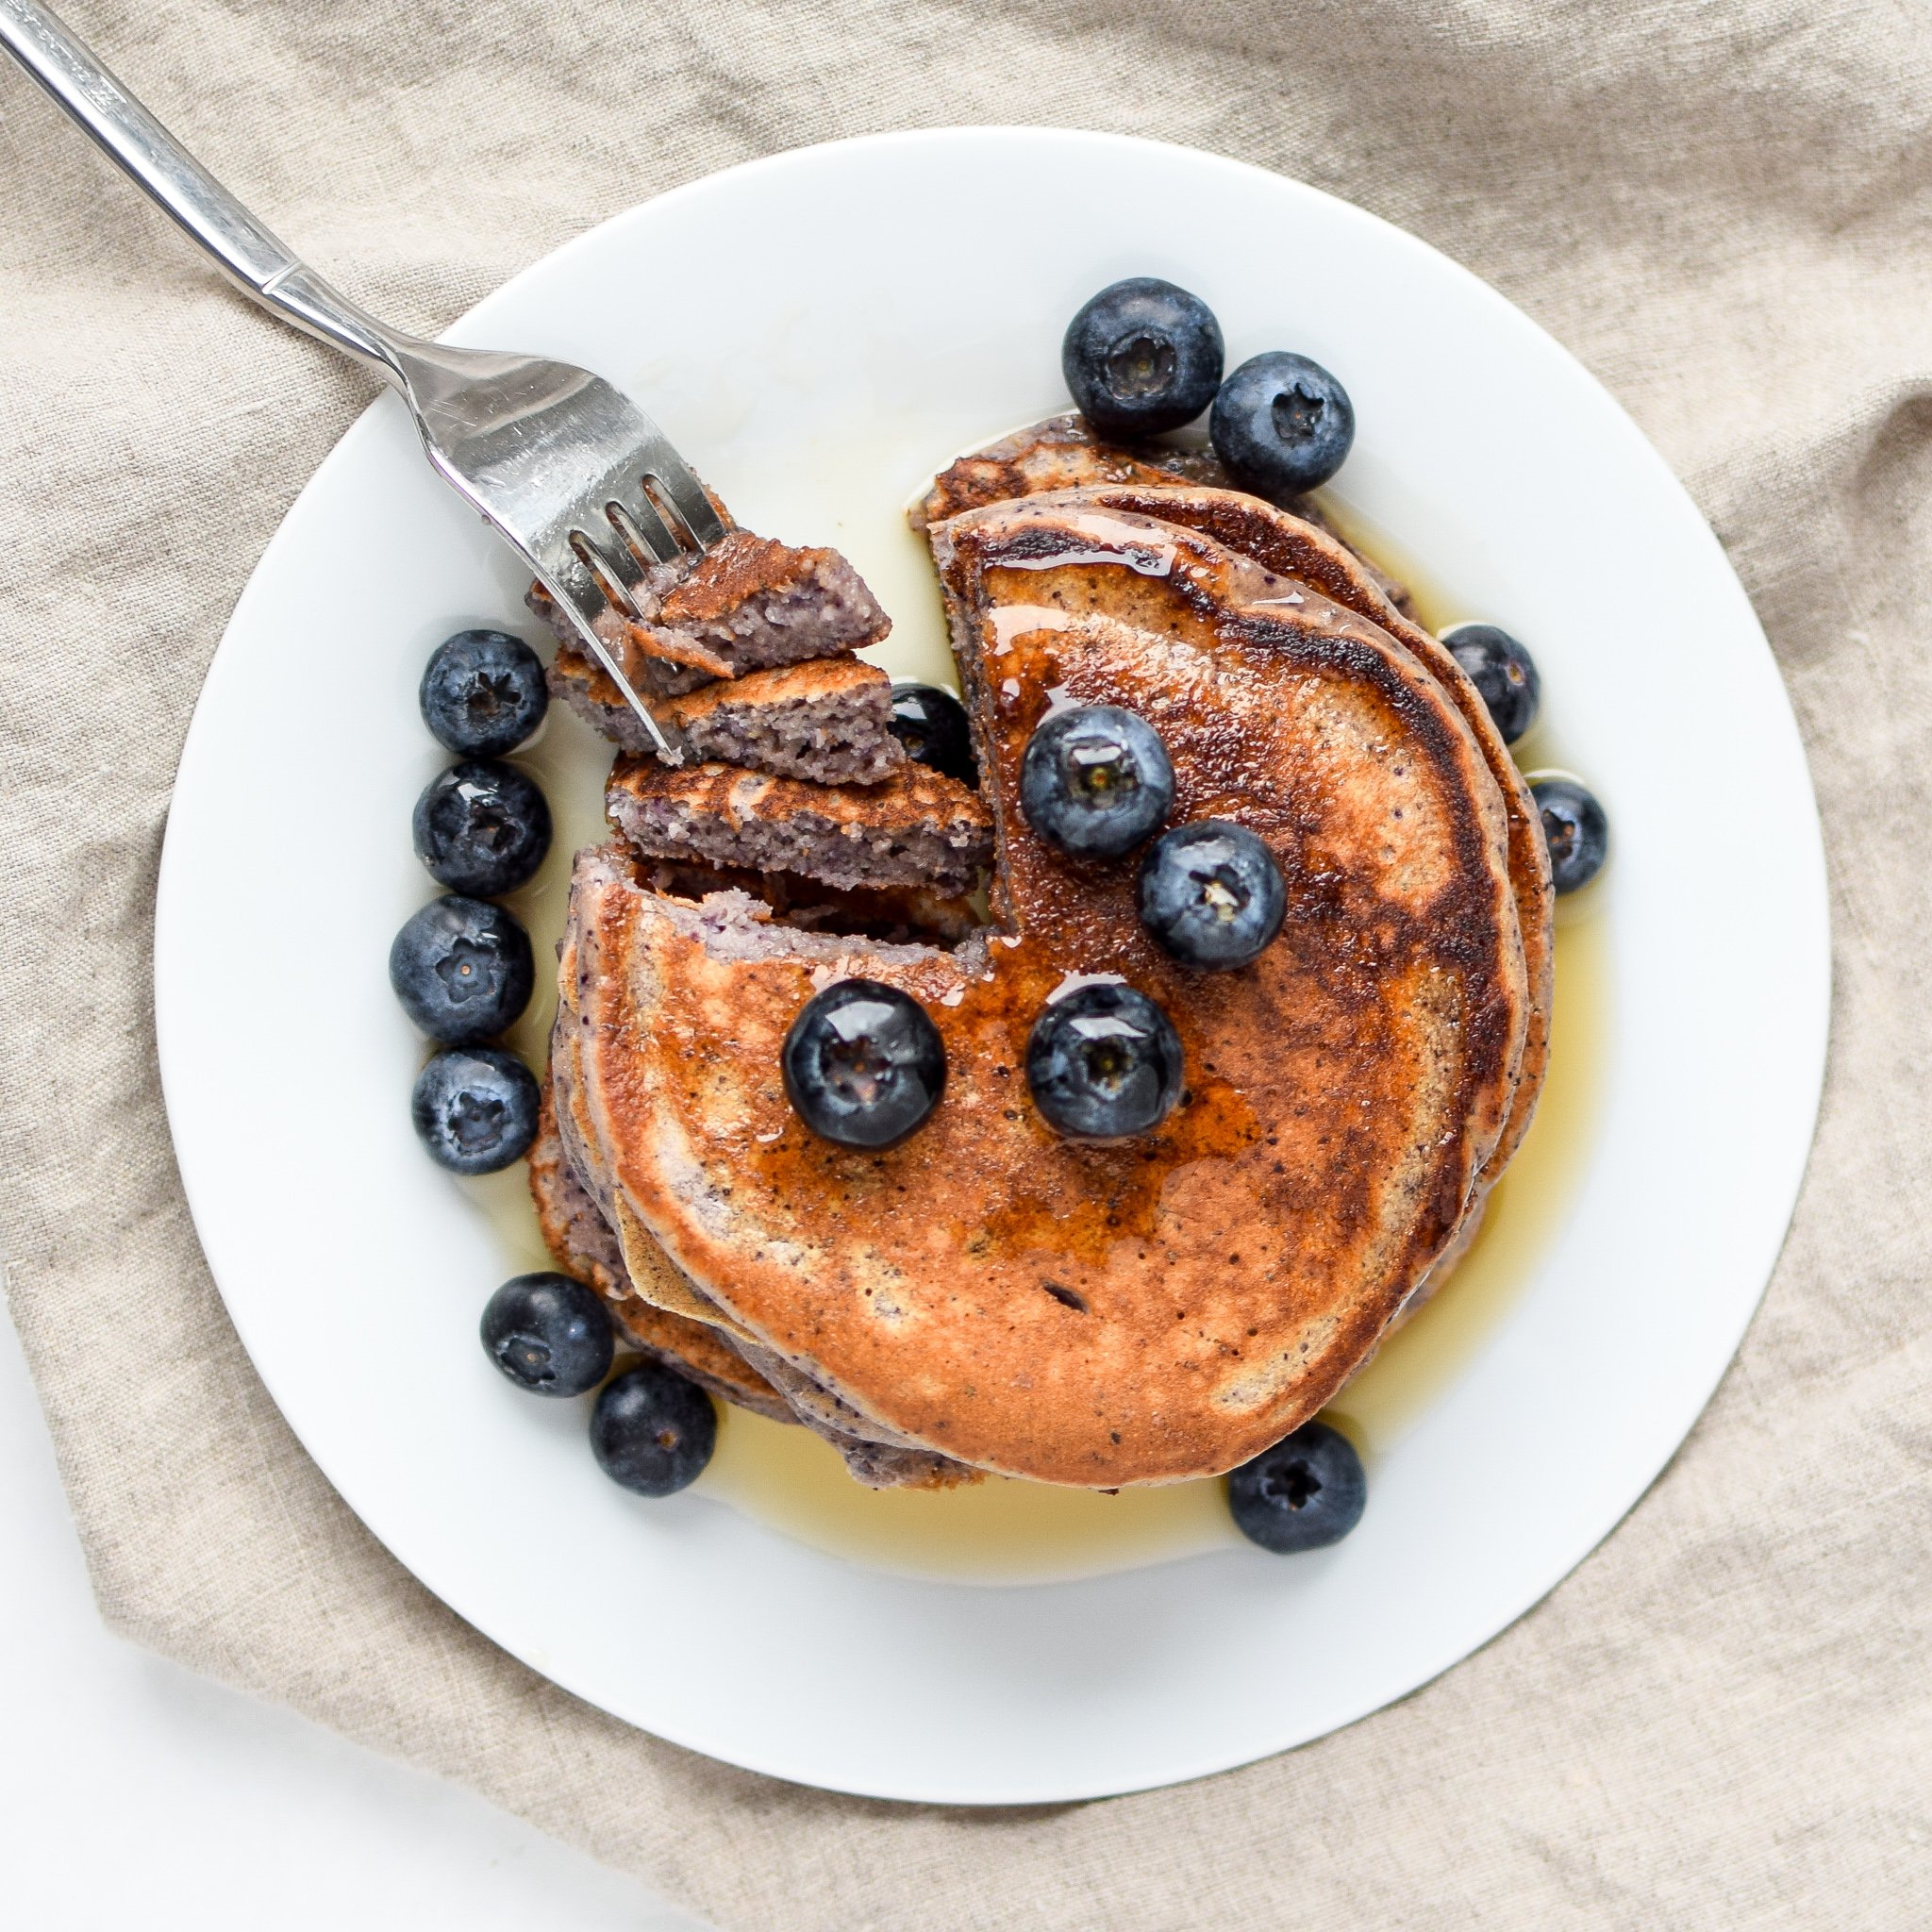 Lemon Poppy Seed Blueberry Protein Pancakes topped with blueberries and maple syrup